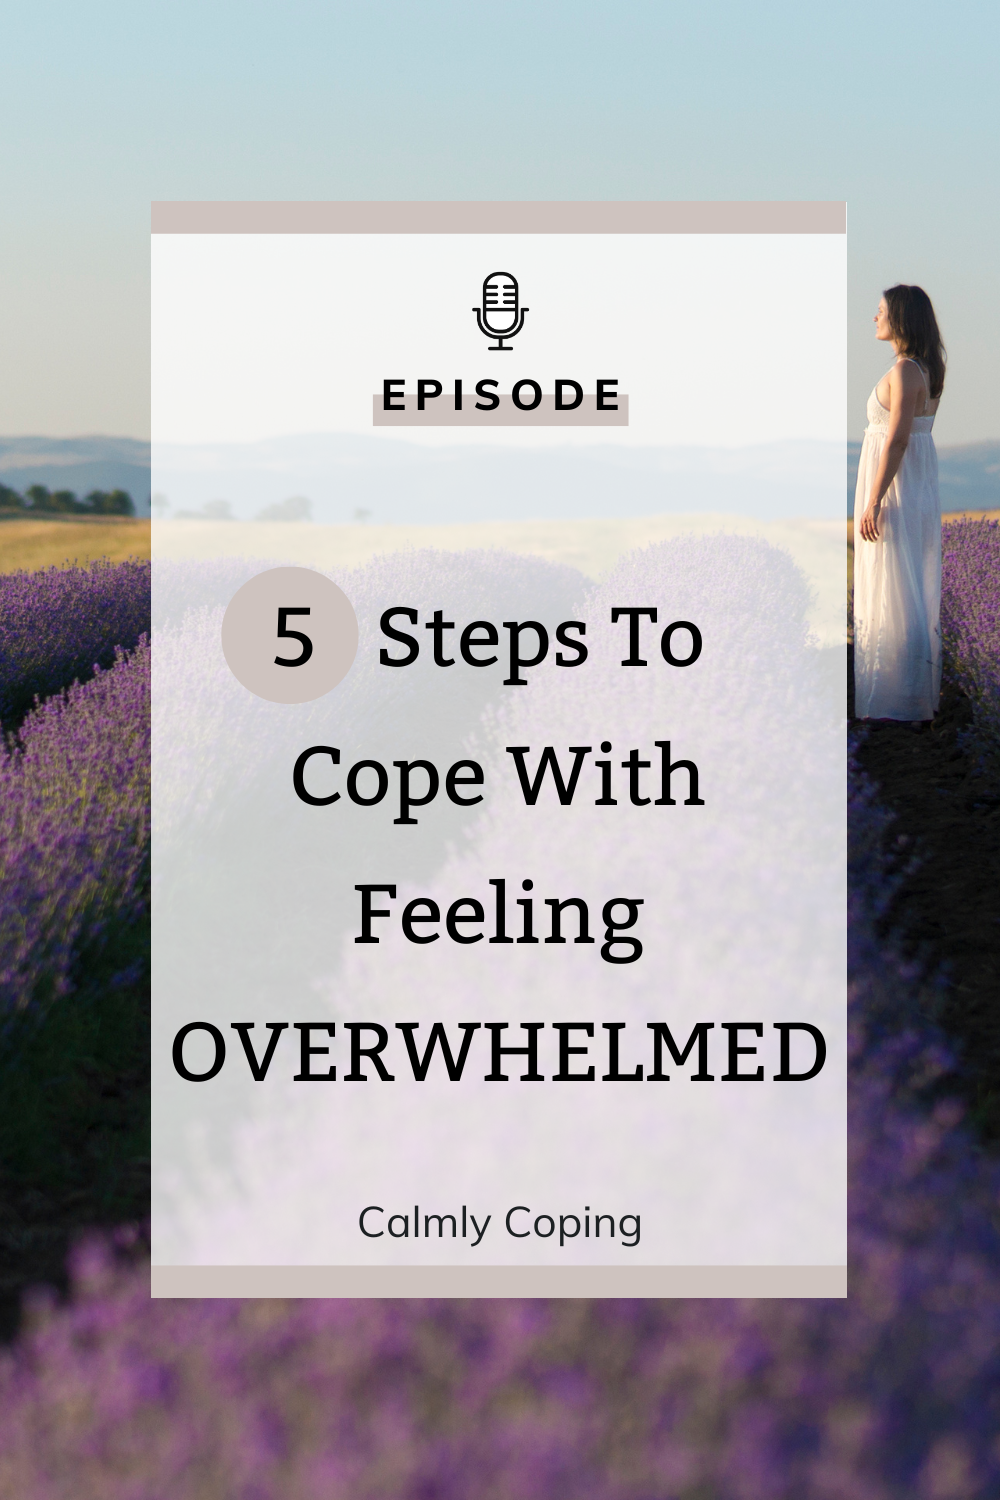 5 Steps To Cope With Feeling OVERWHELMED